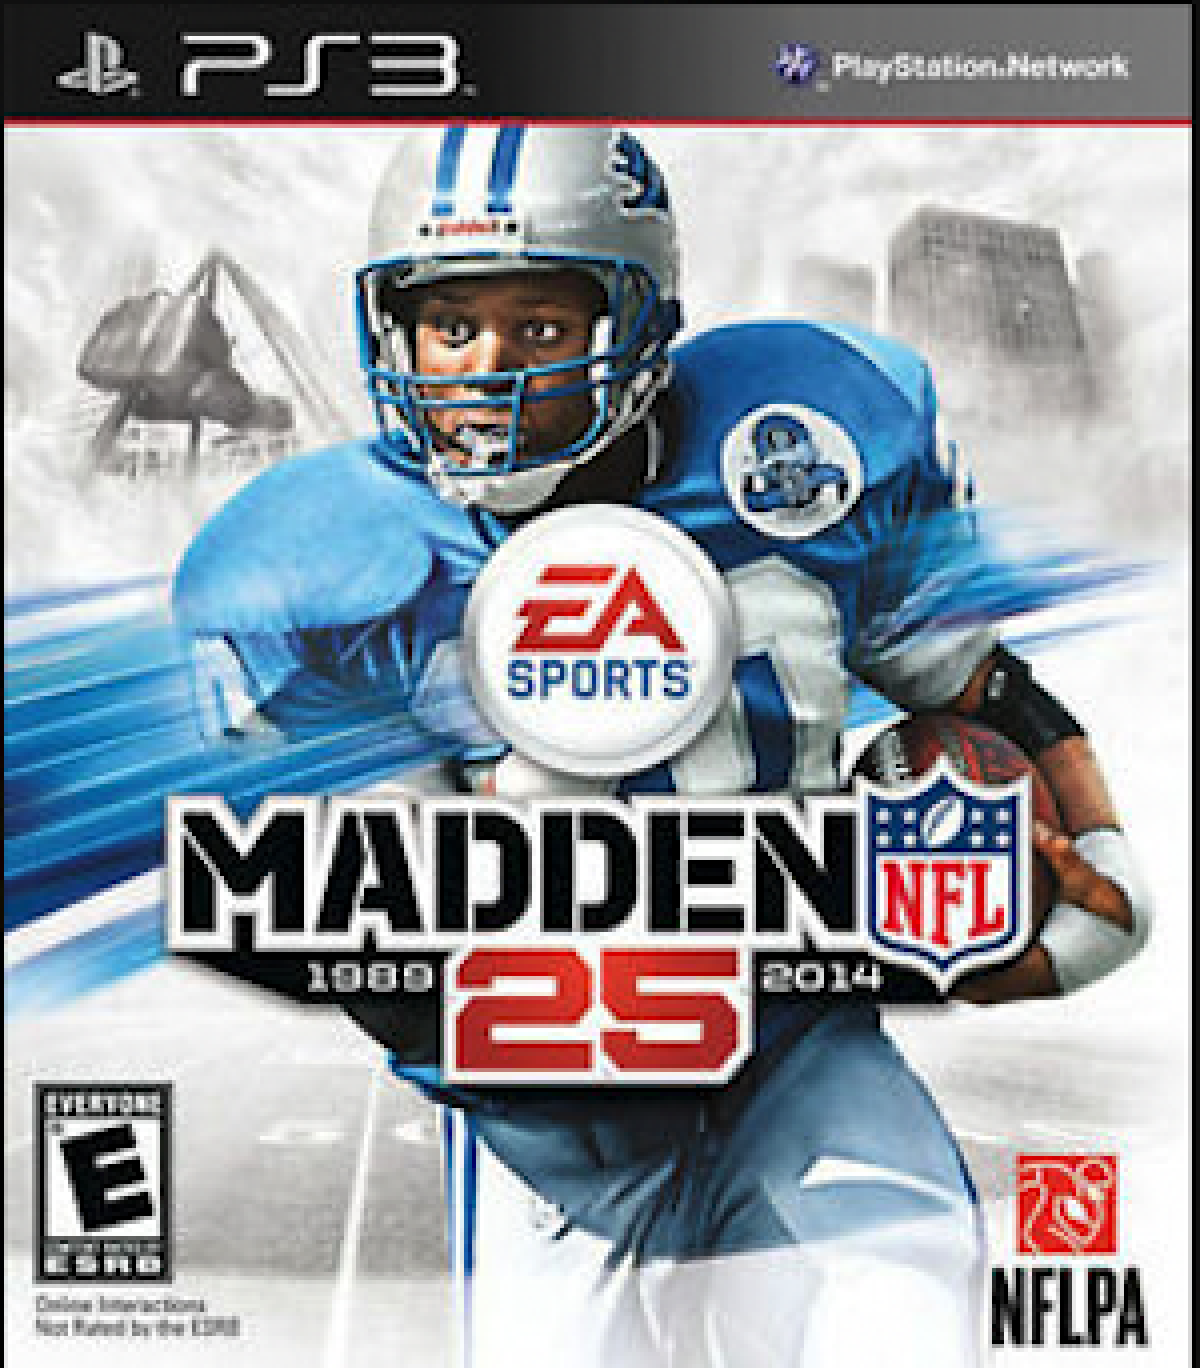 Ranking the Best Madden Covers, Including John Madden, Michael